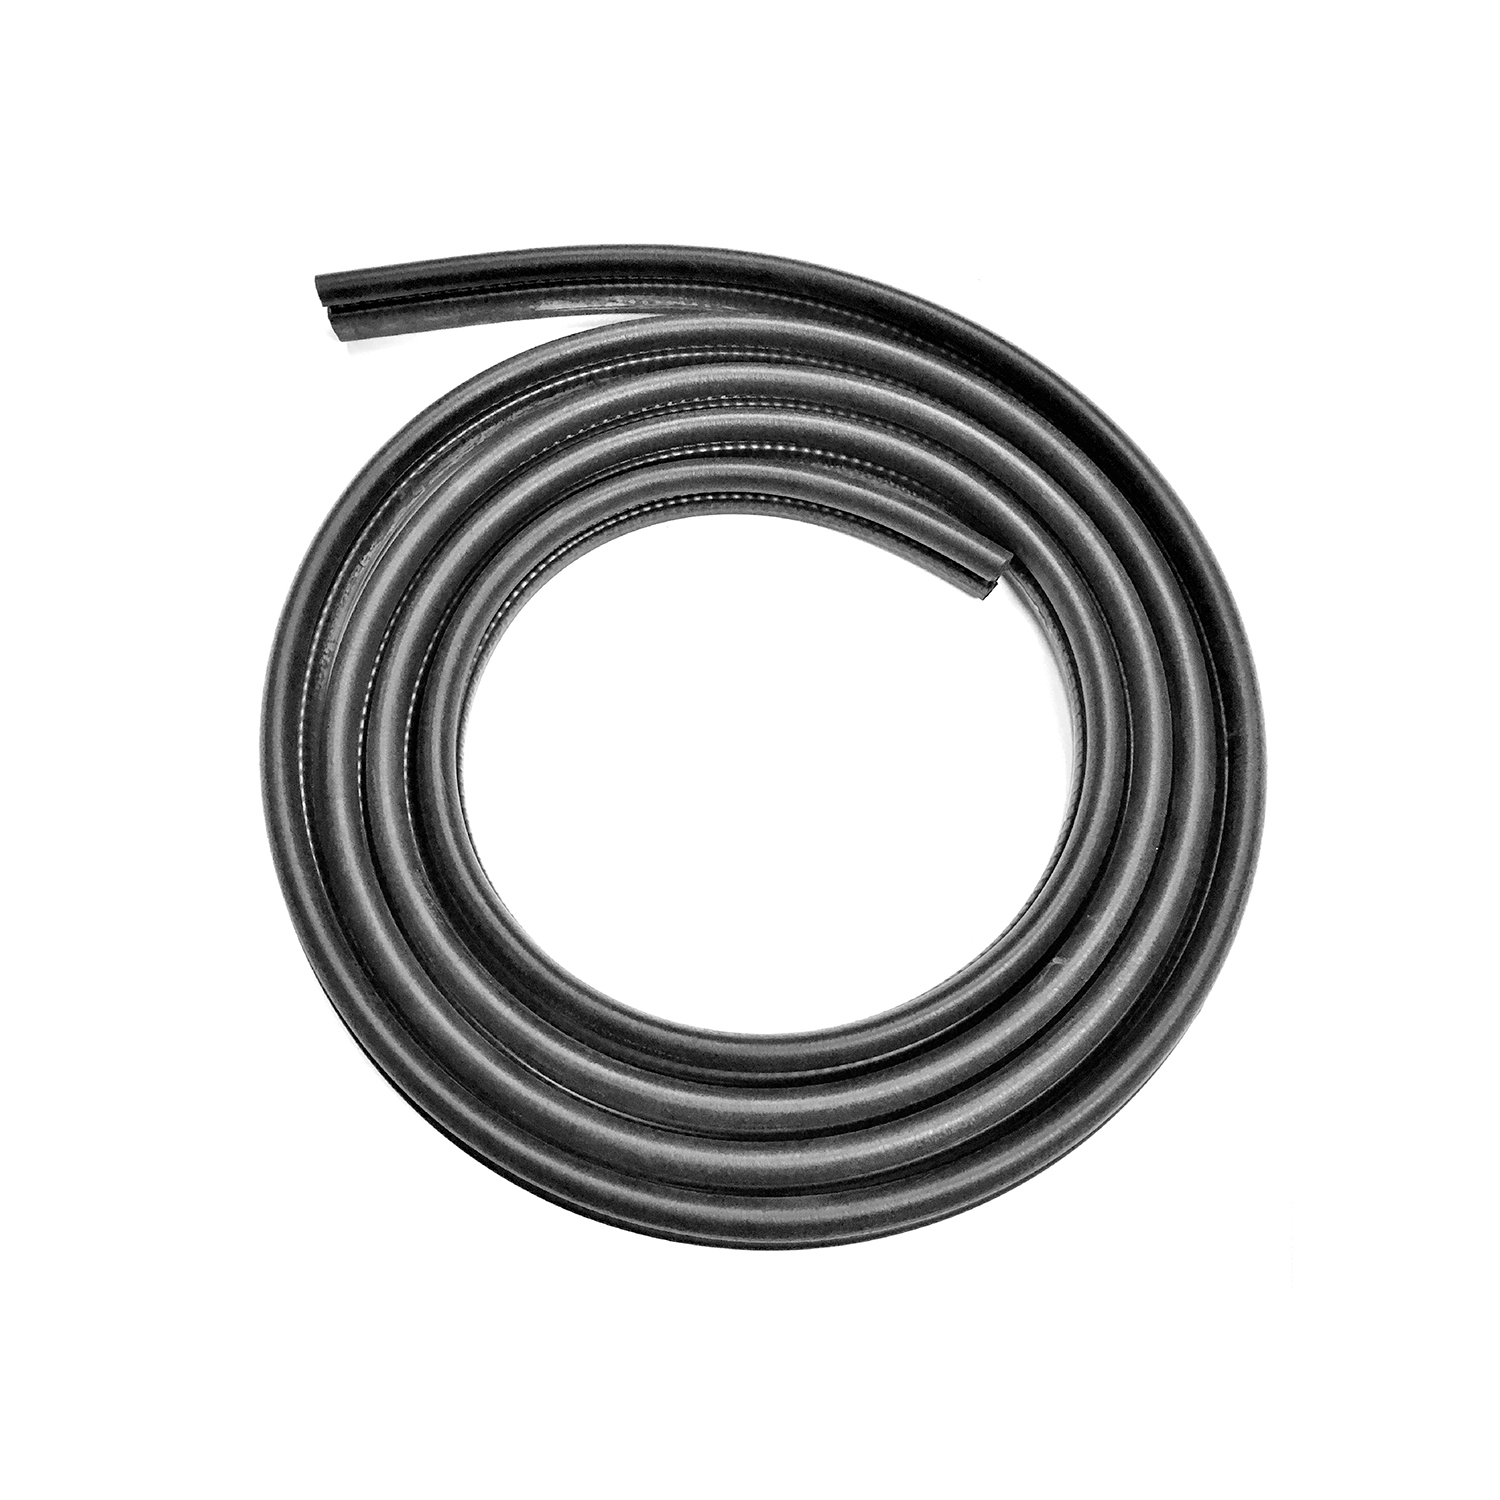 2009 Ford E-450 Super Duty Door seal, '04-'14 Ford E-Series full size van models, fits front left or right-LM 110-VH